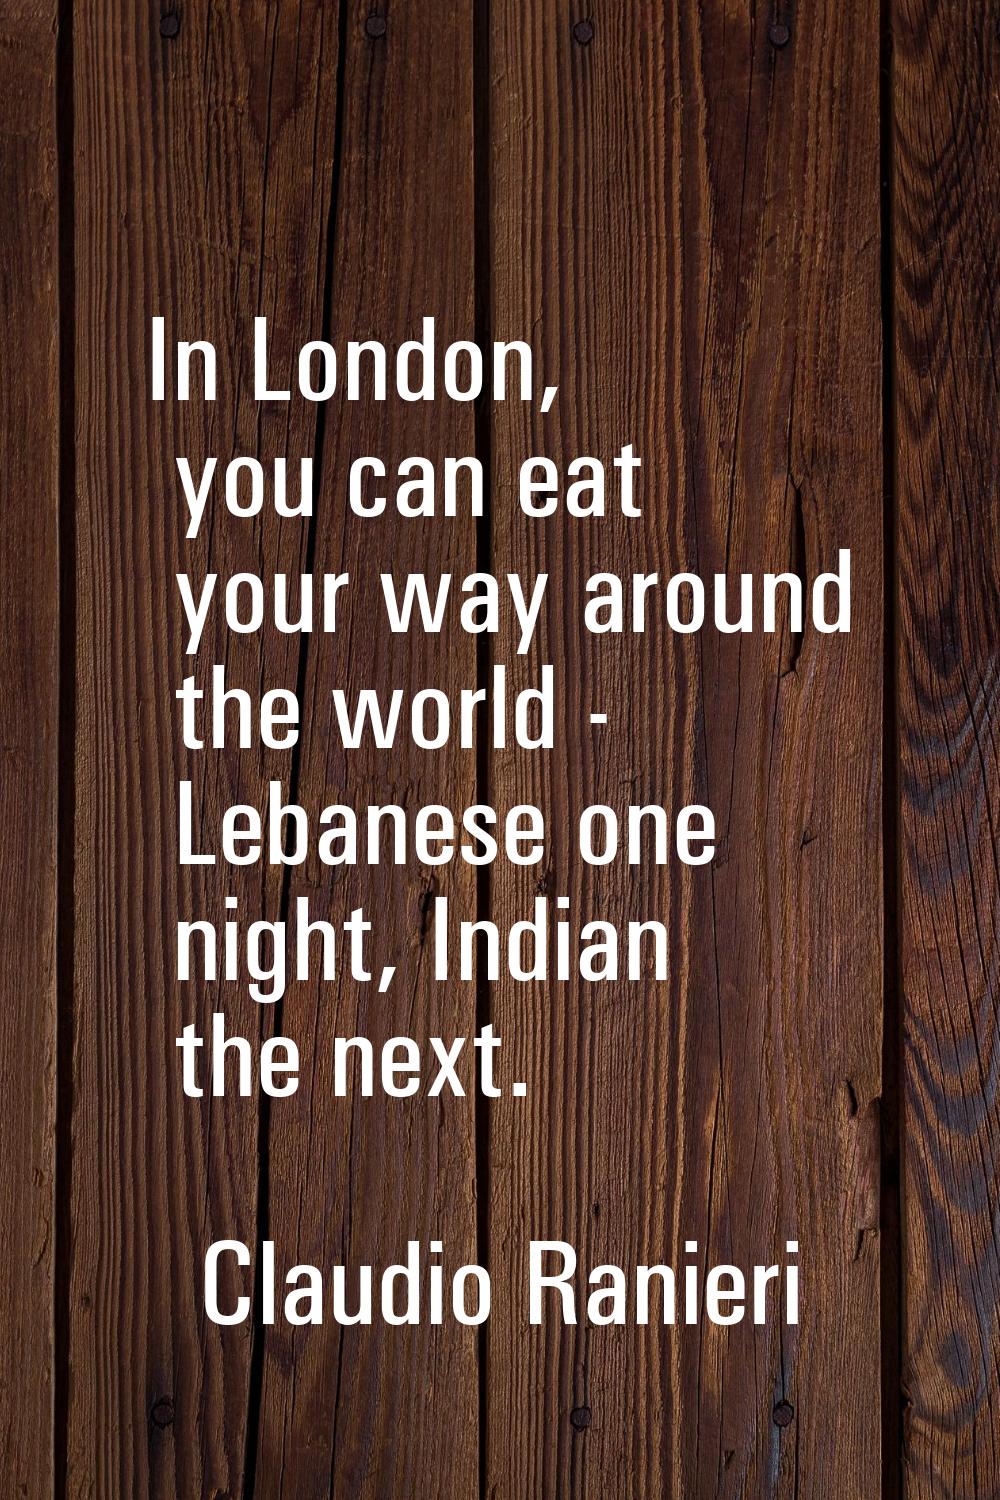 In London, you can eat your way around the world - Lebanese one night, Indian the next.